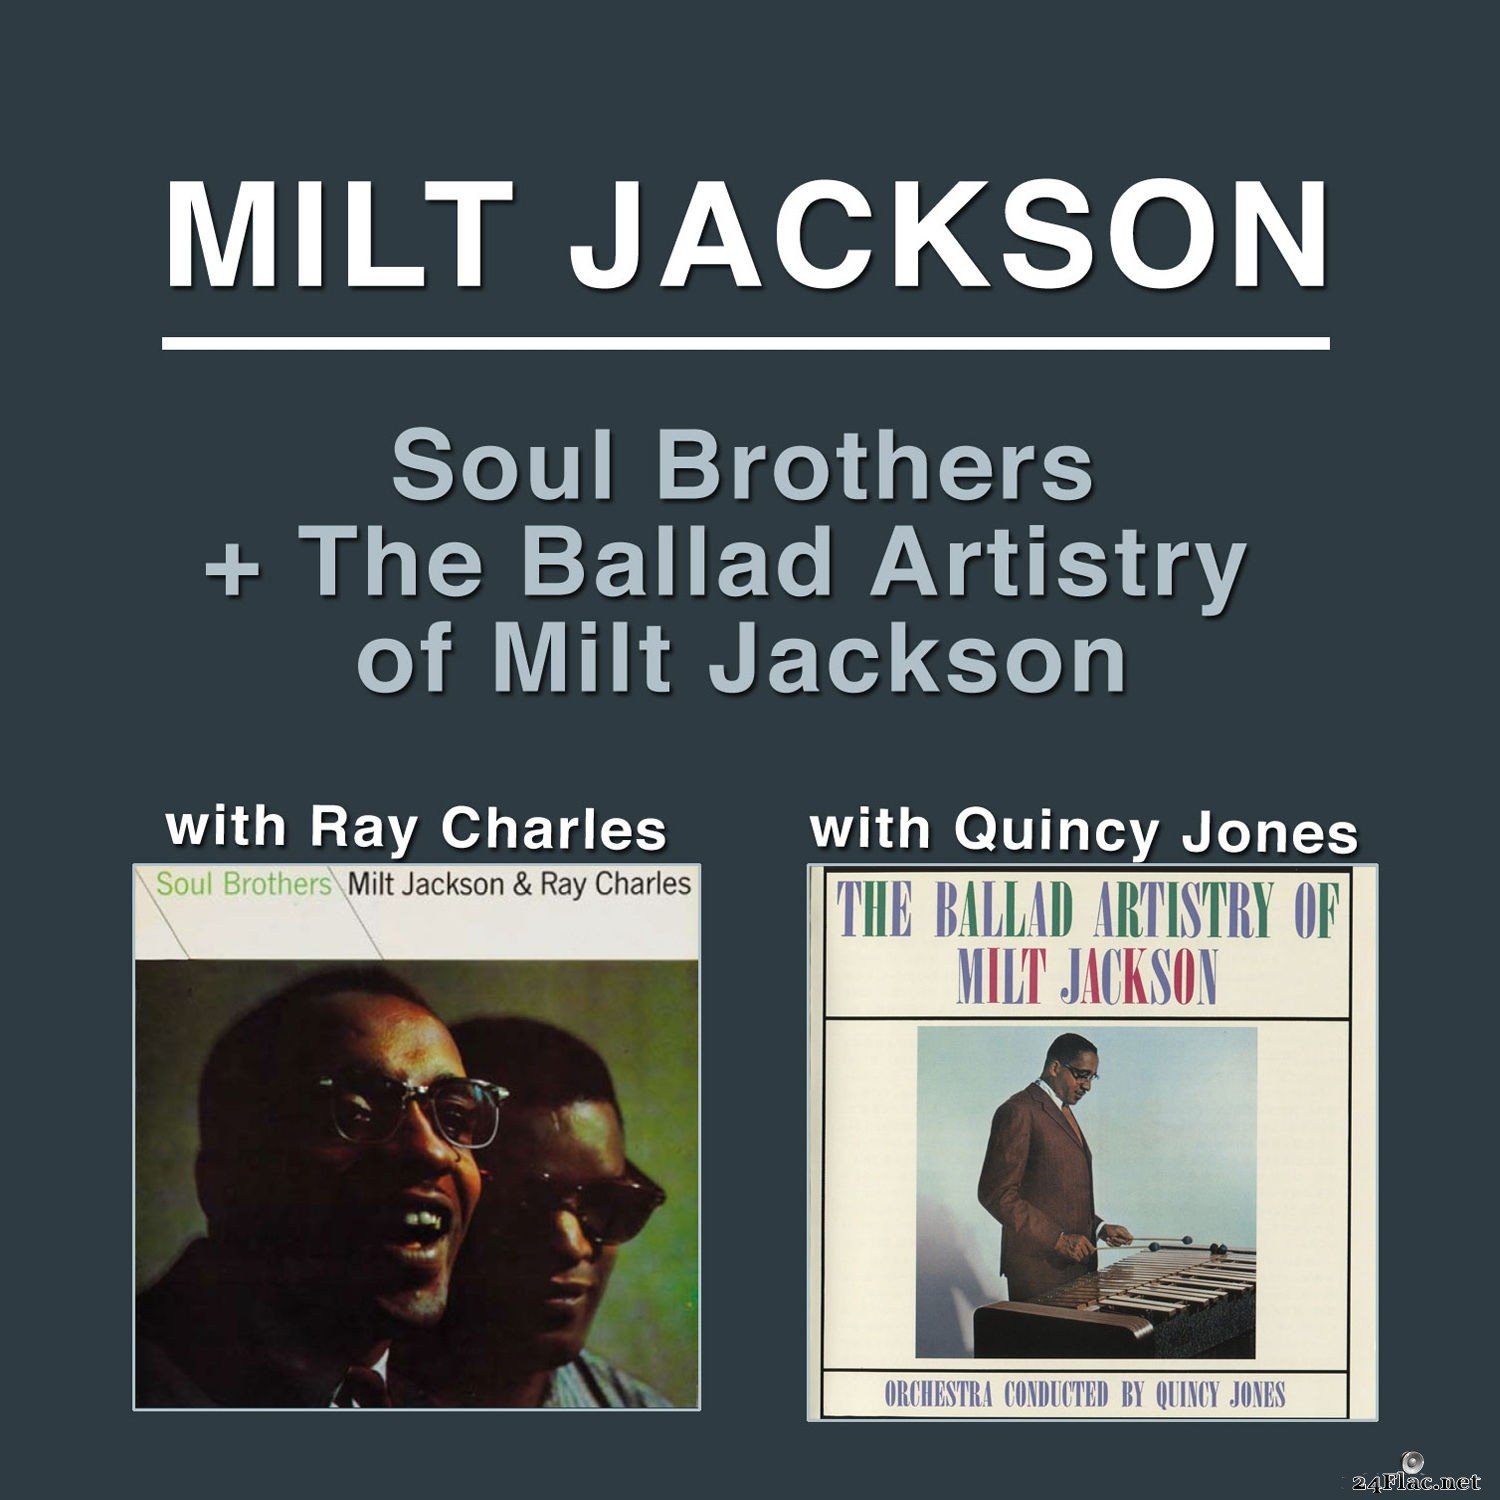 Milt Jackson - Soul Brothers (with Ray Charles) + the Ballad Artistry of Milt Jackson [with Orchestra Conducted by Quincy Jones] (2013) FLAC